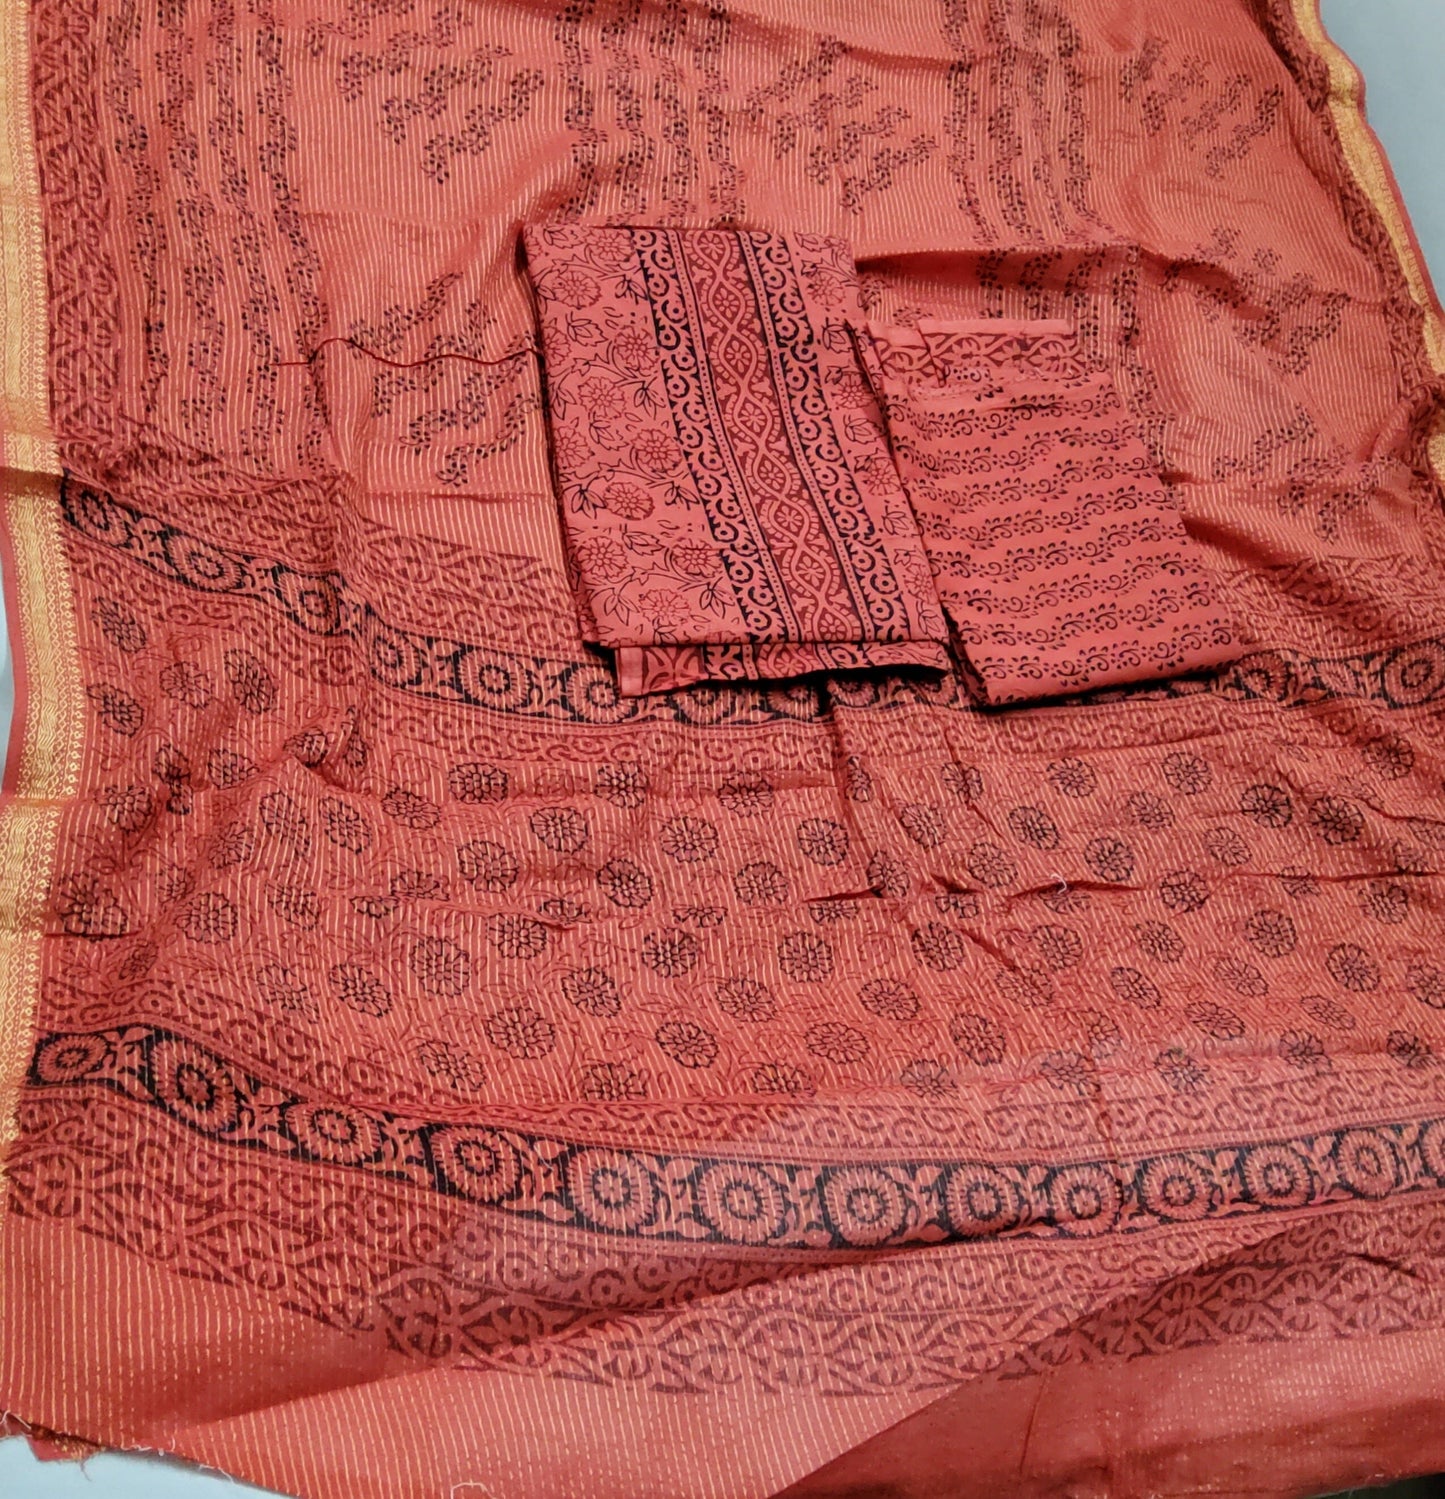 Bagh Print Cotton Dress Material with Cotton Dupatta